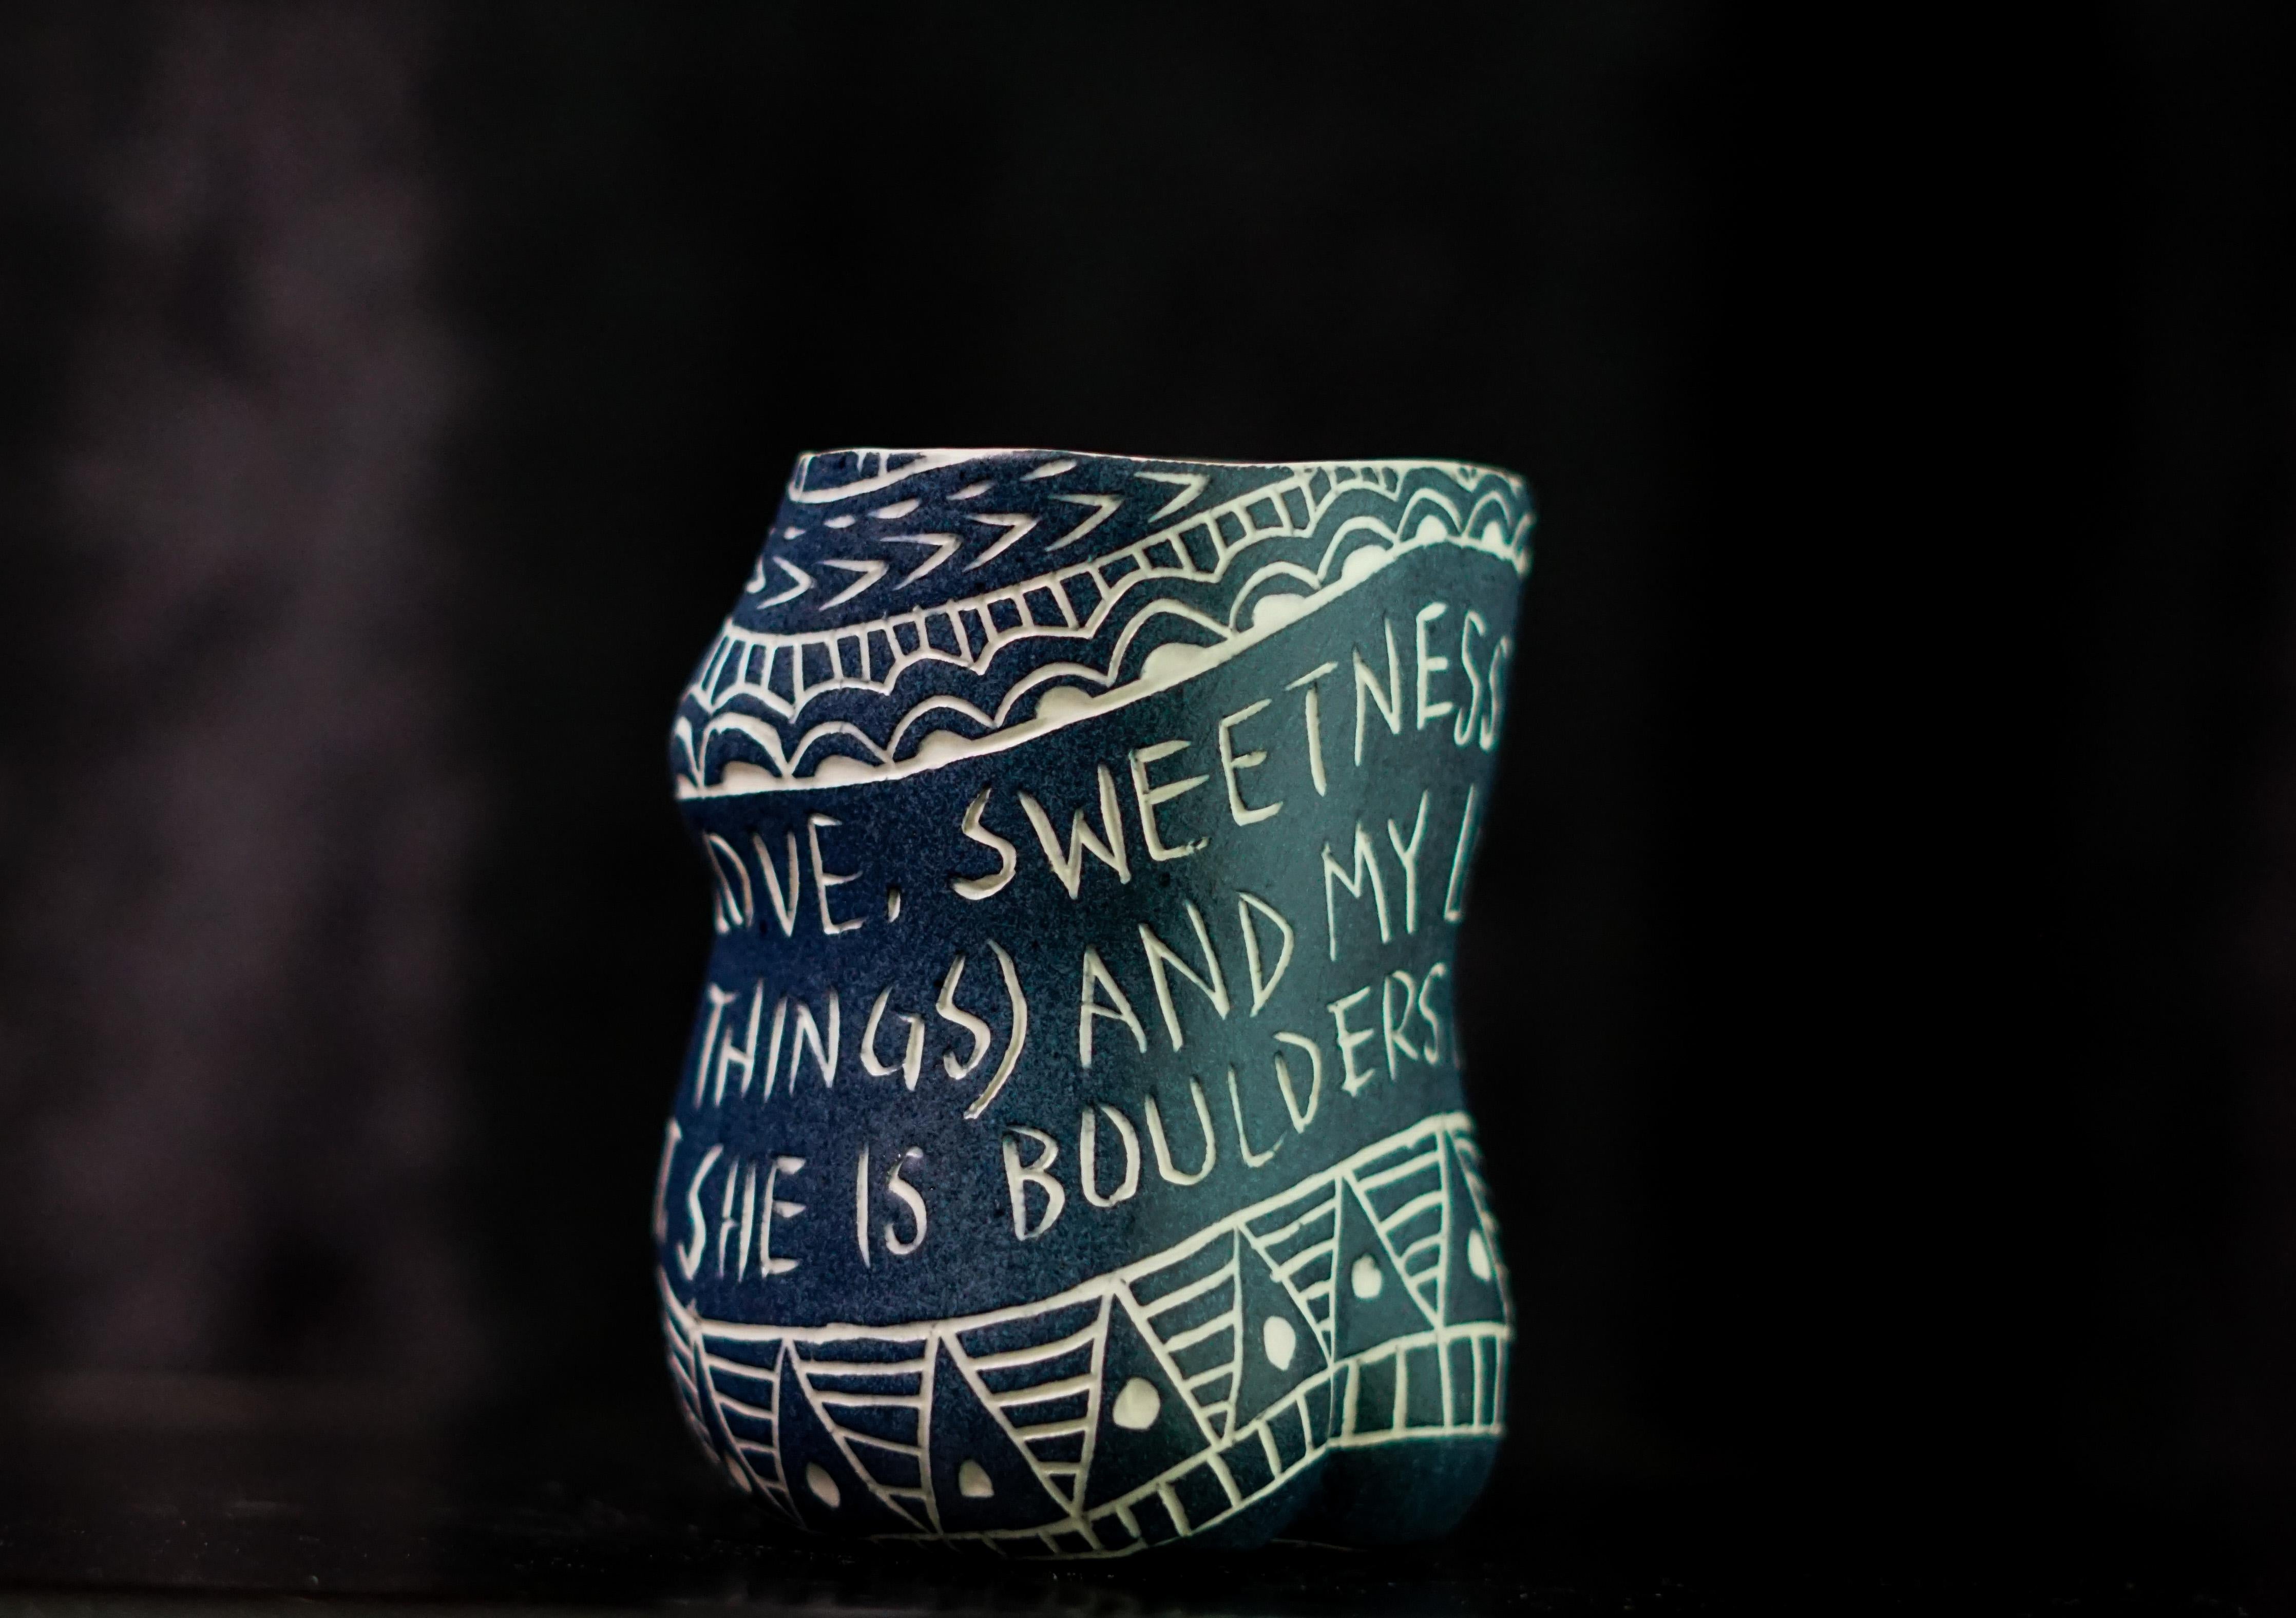 “The Rush of Love..” Porcelain cup with sgraffito detailing by the artist - Modern Sculpture by Alex Hodge